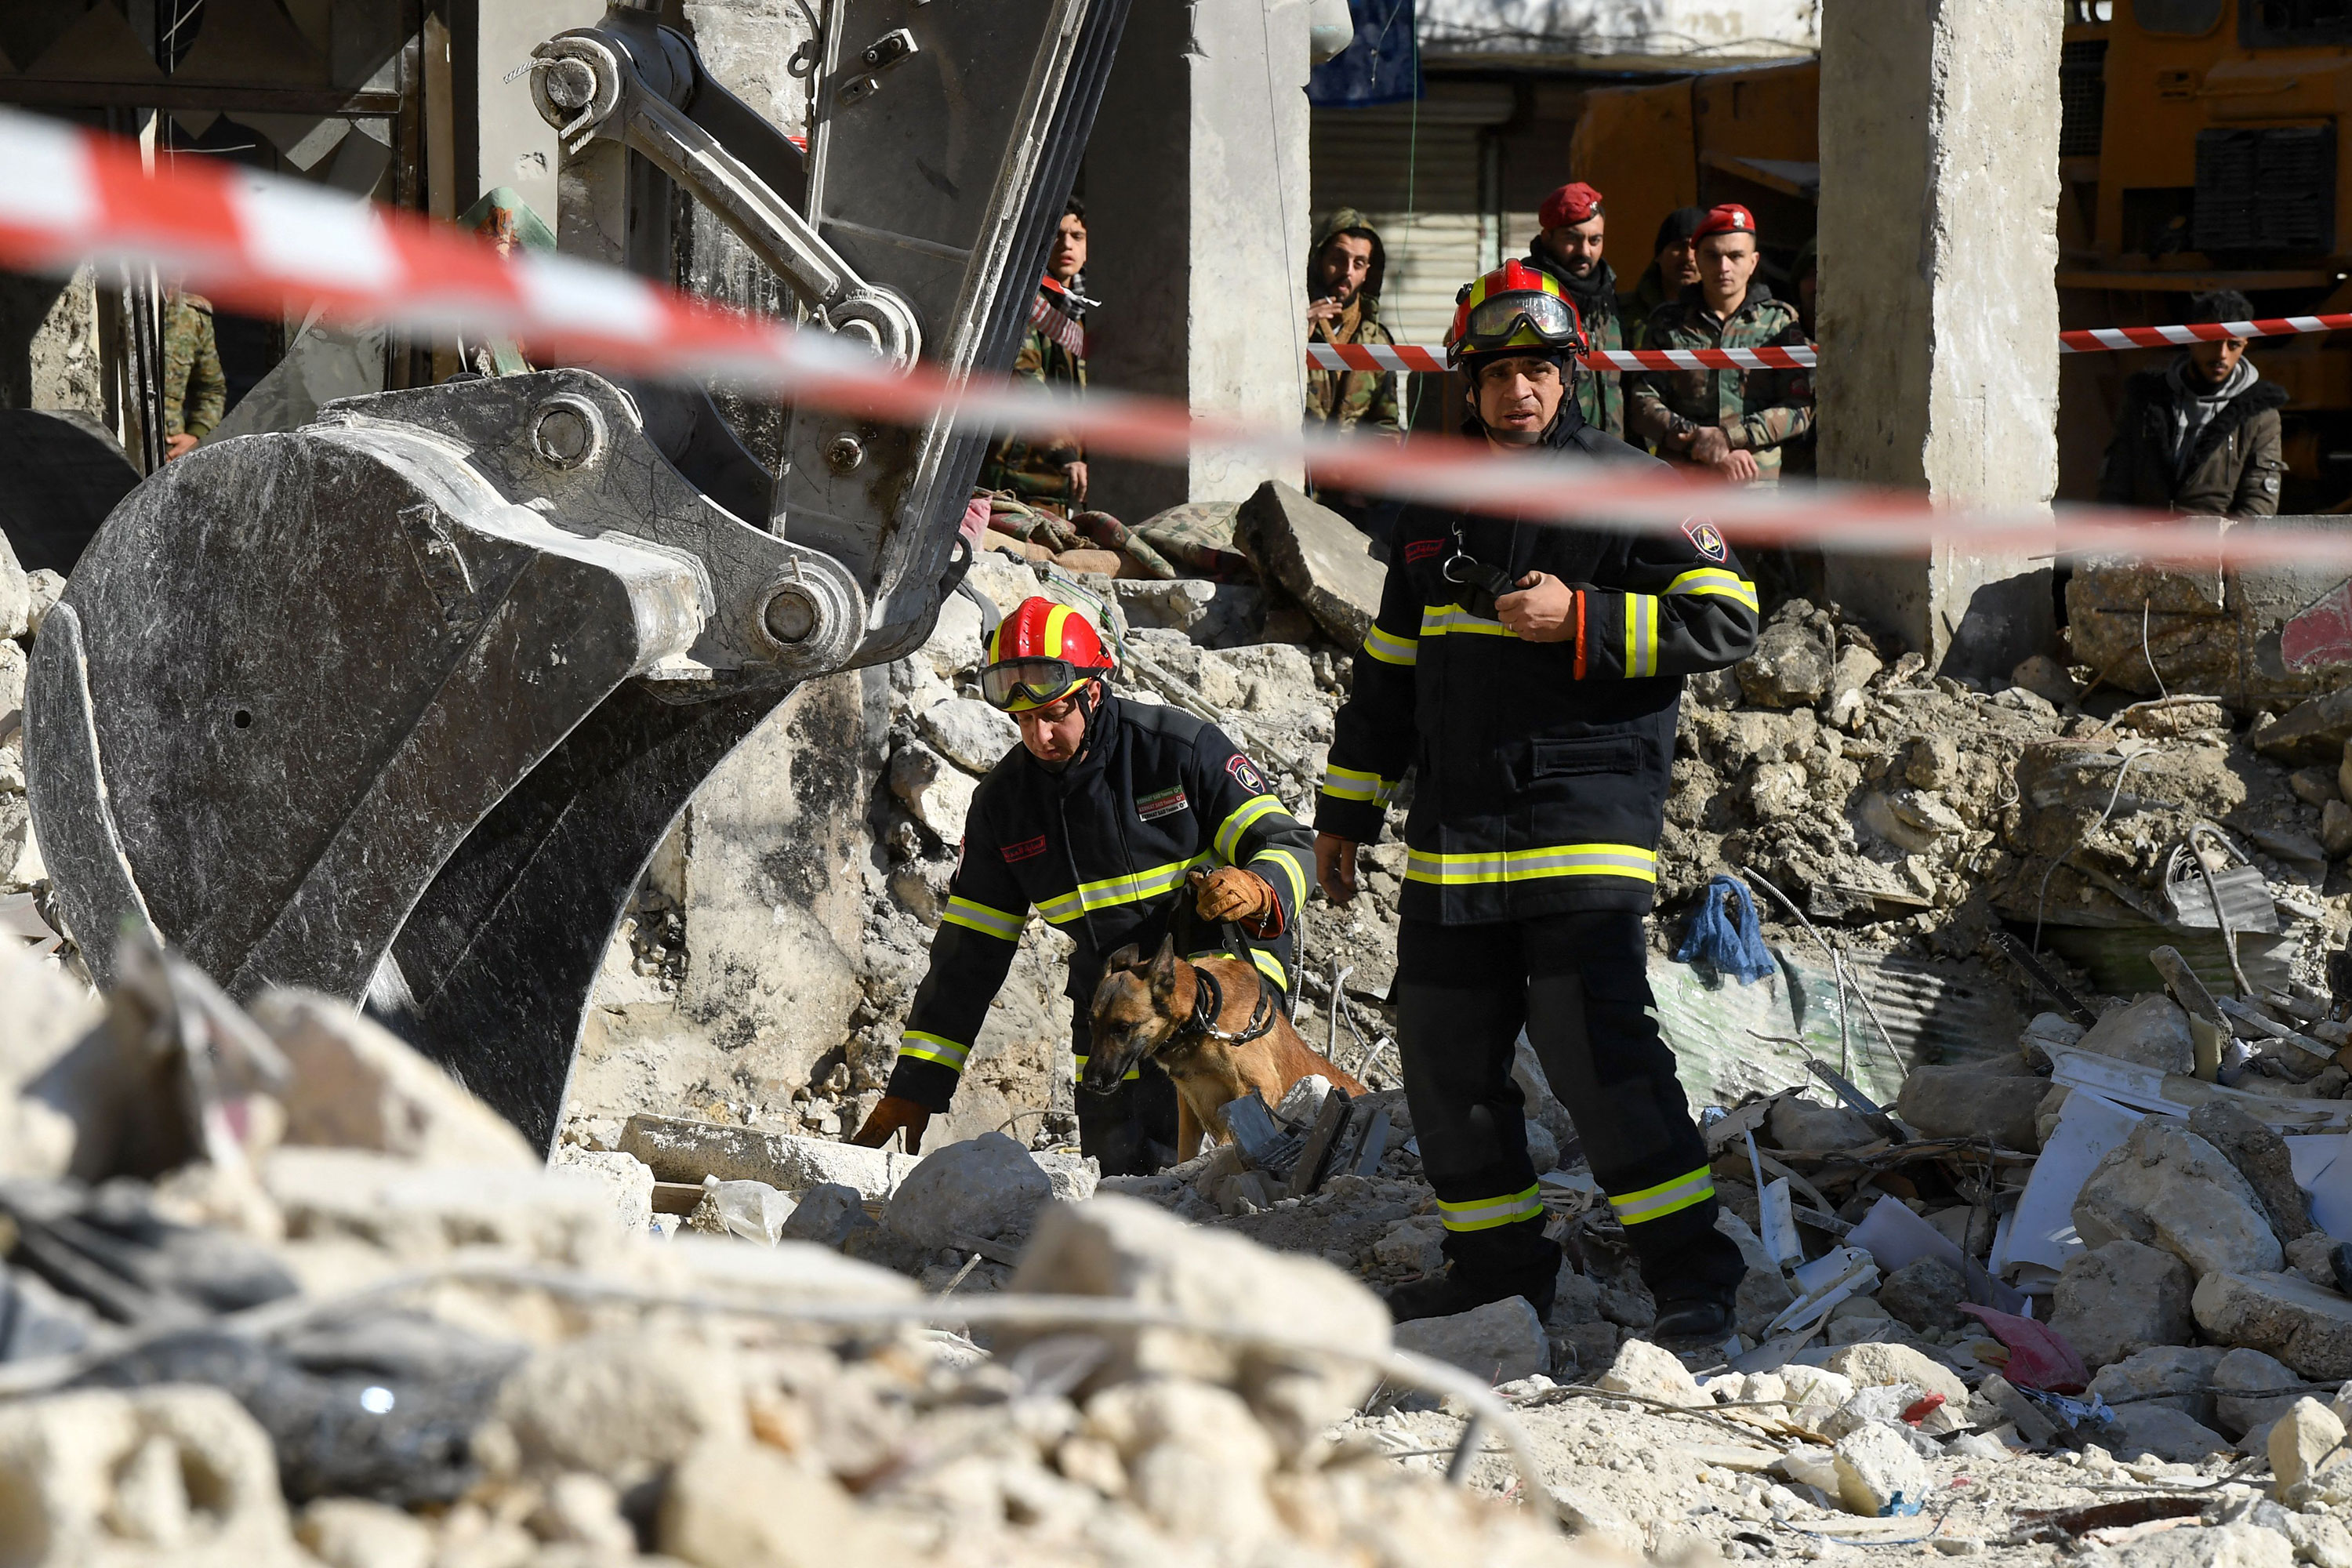 Algerian rescue teams use a dog as they search the rubble in Aleppo on Wednesday.